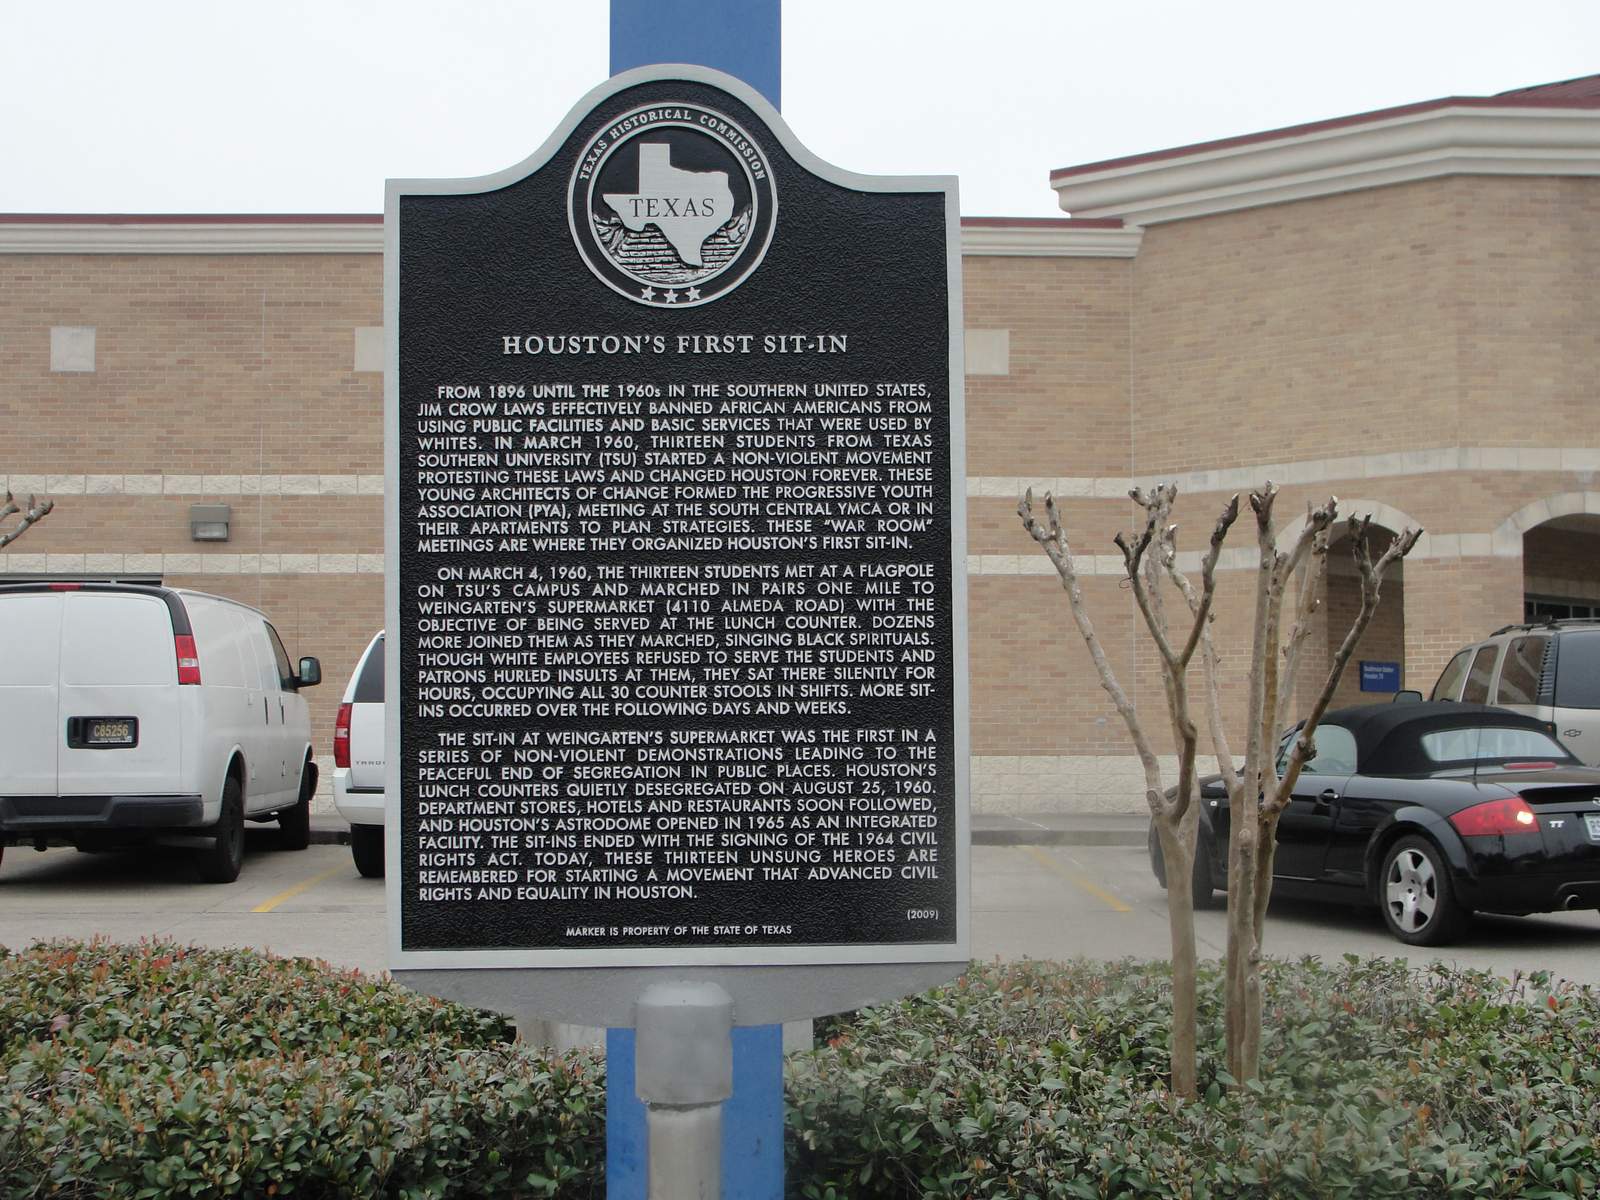 Historical marker noting the location of Houston's first sit-in